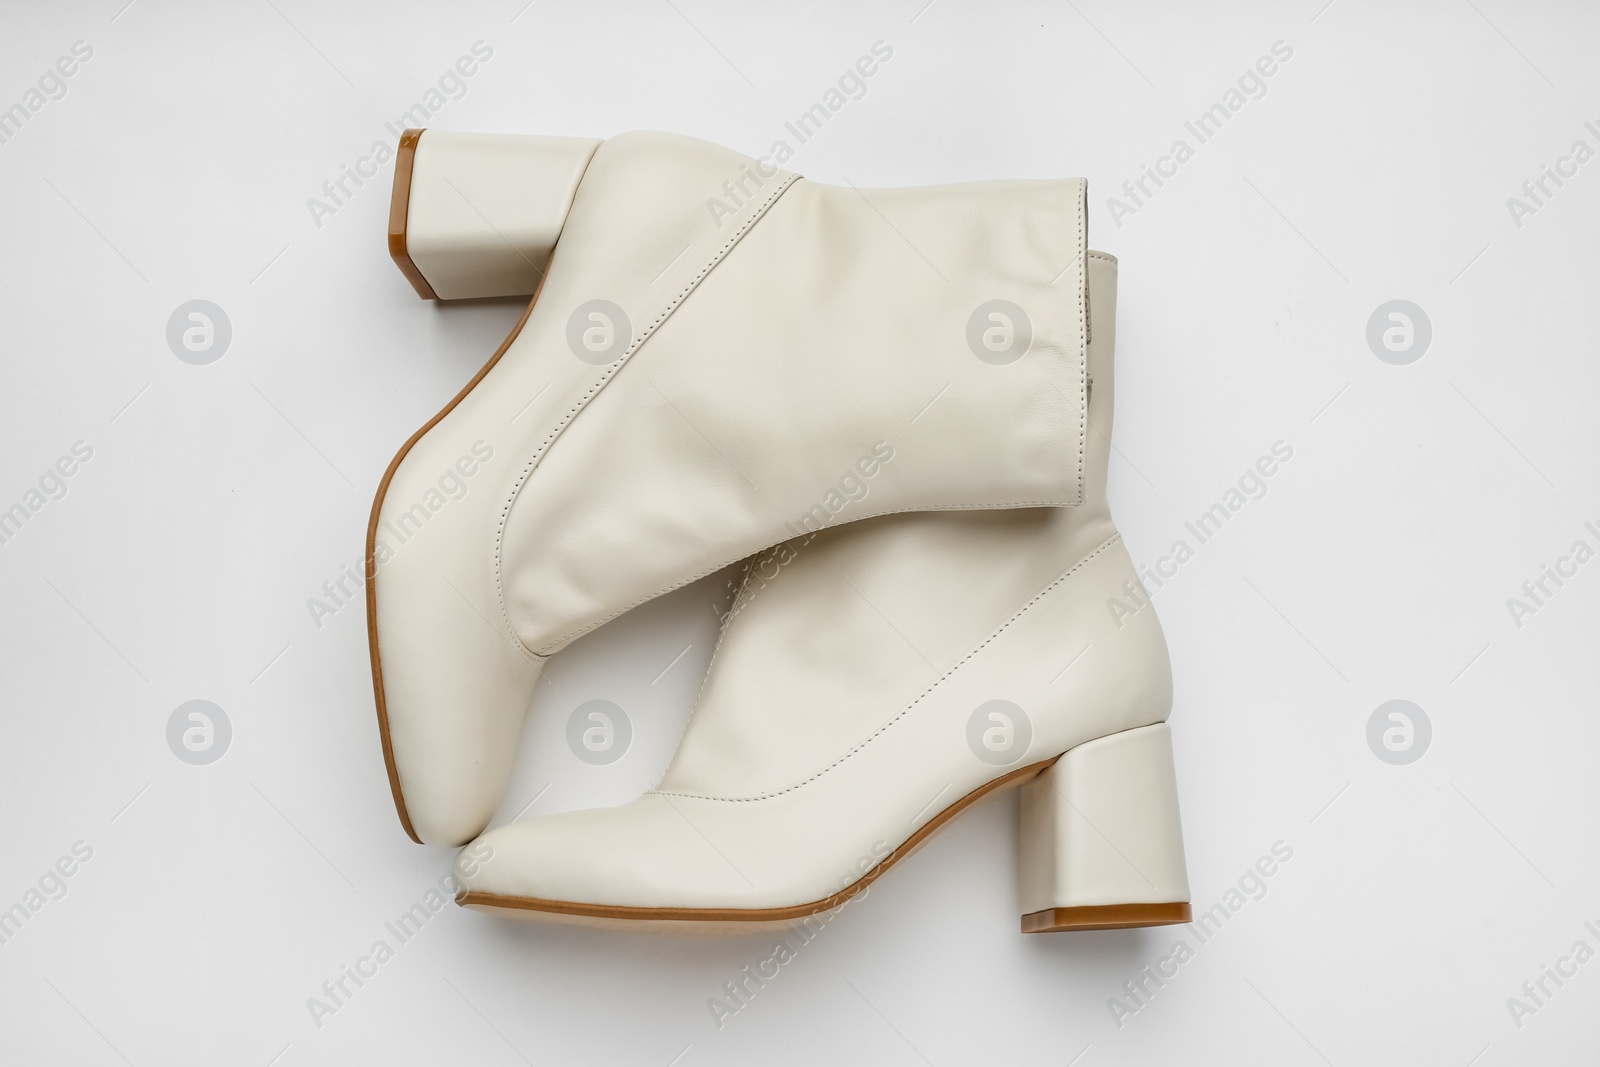 Photo of Pair of stylish leather shoes on white background, top view